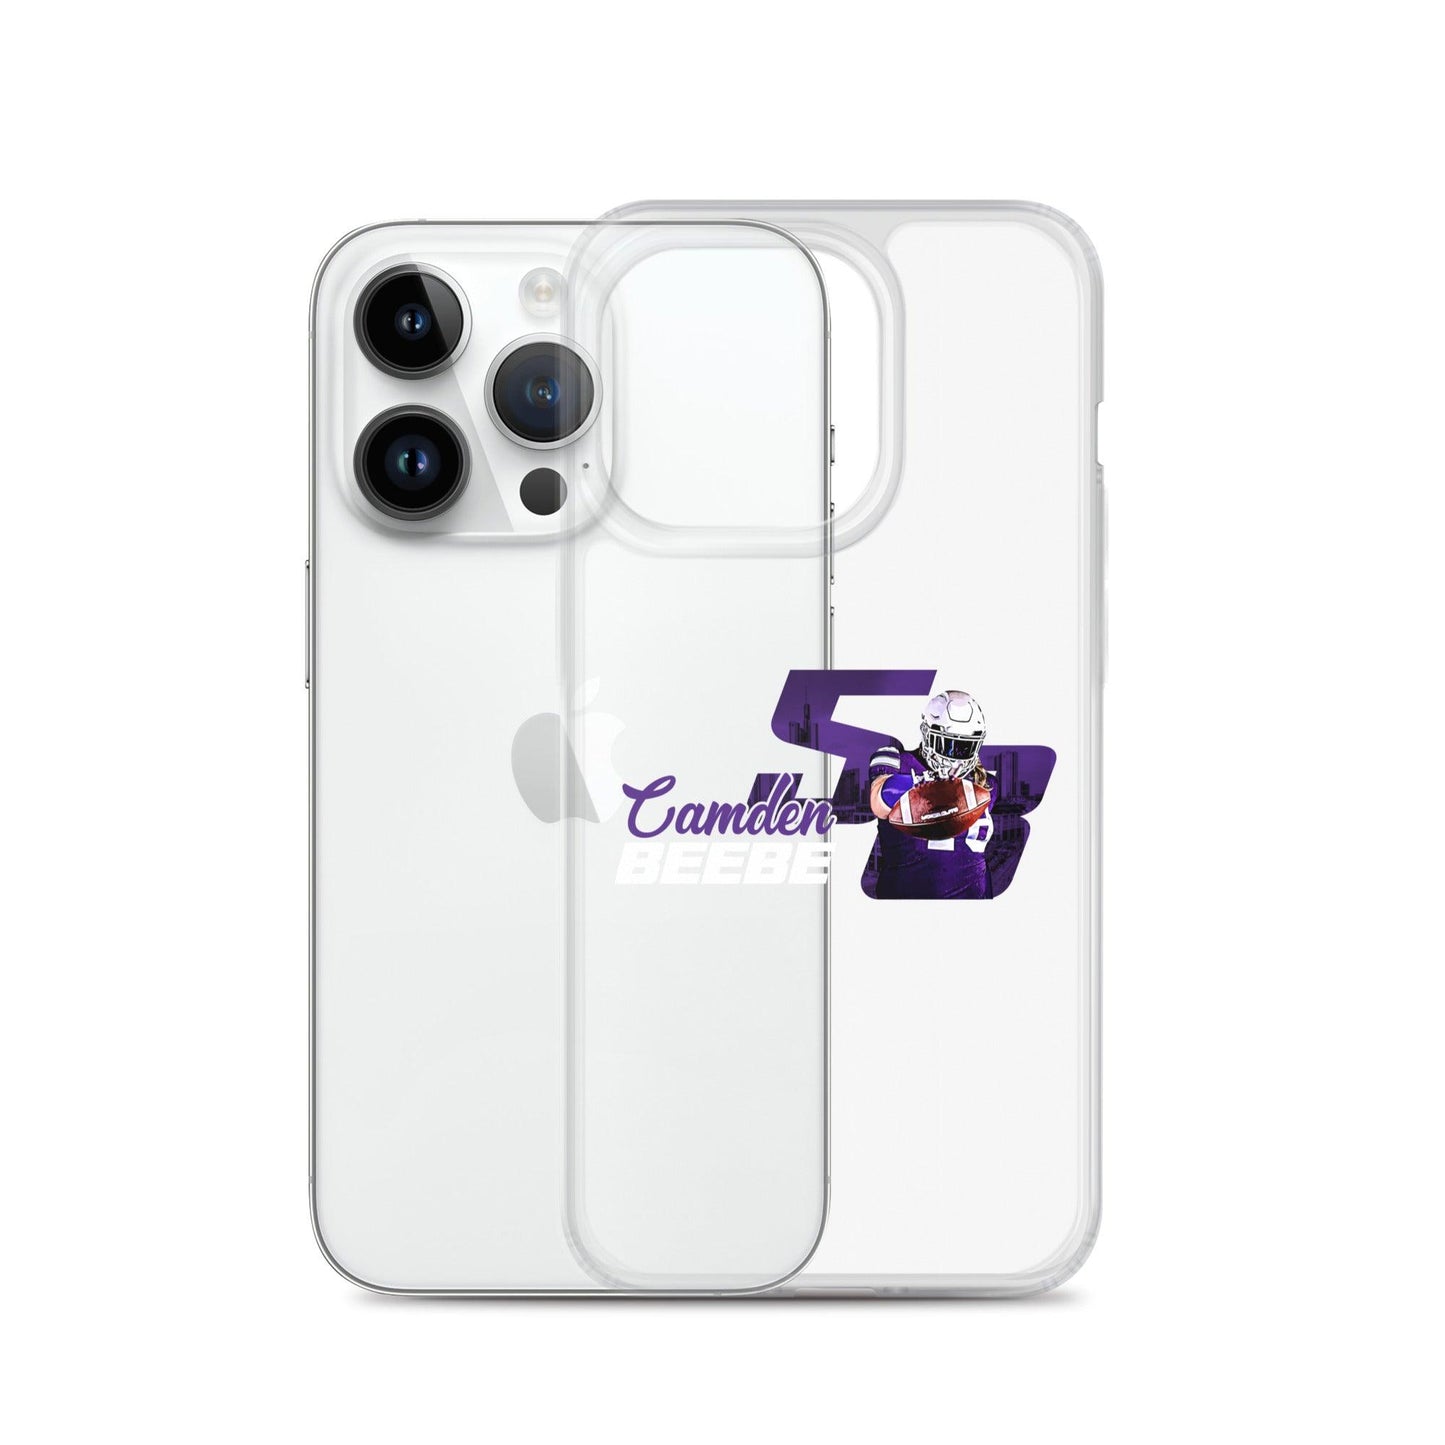 Camden Beebe "Gameday" iPhone® - Fan Arch